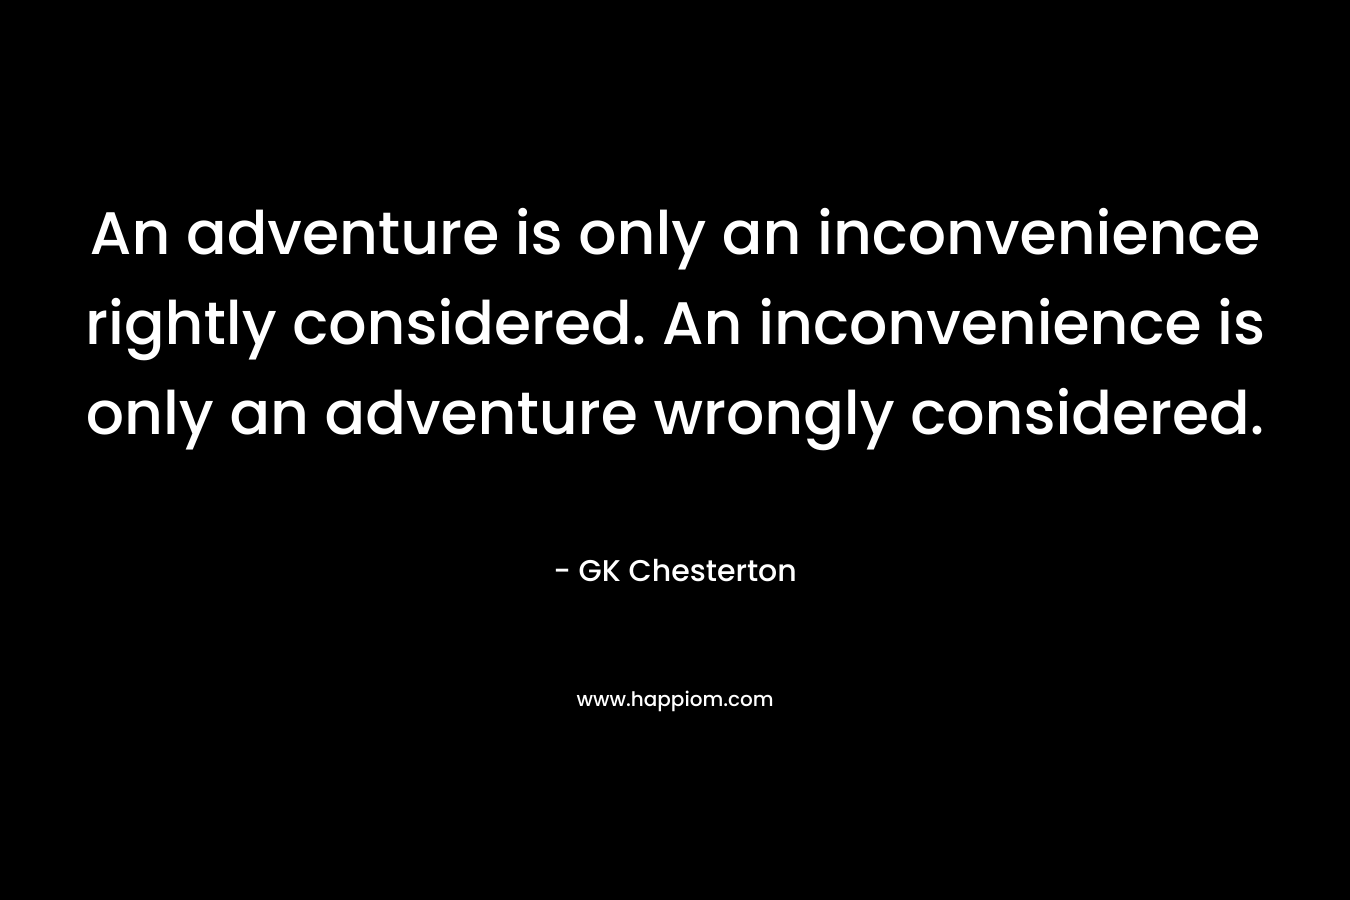 An adventure is only an inconvenience rightly considered. An inconvenience is only an adventure wrongly considered. – GK Chesterton